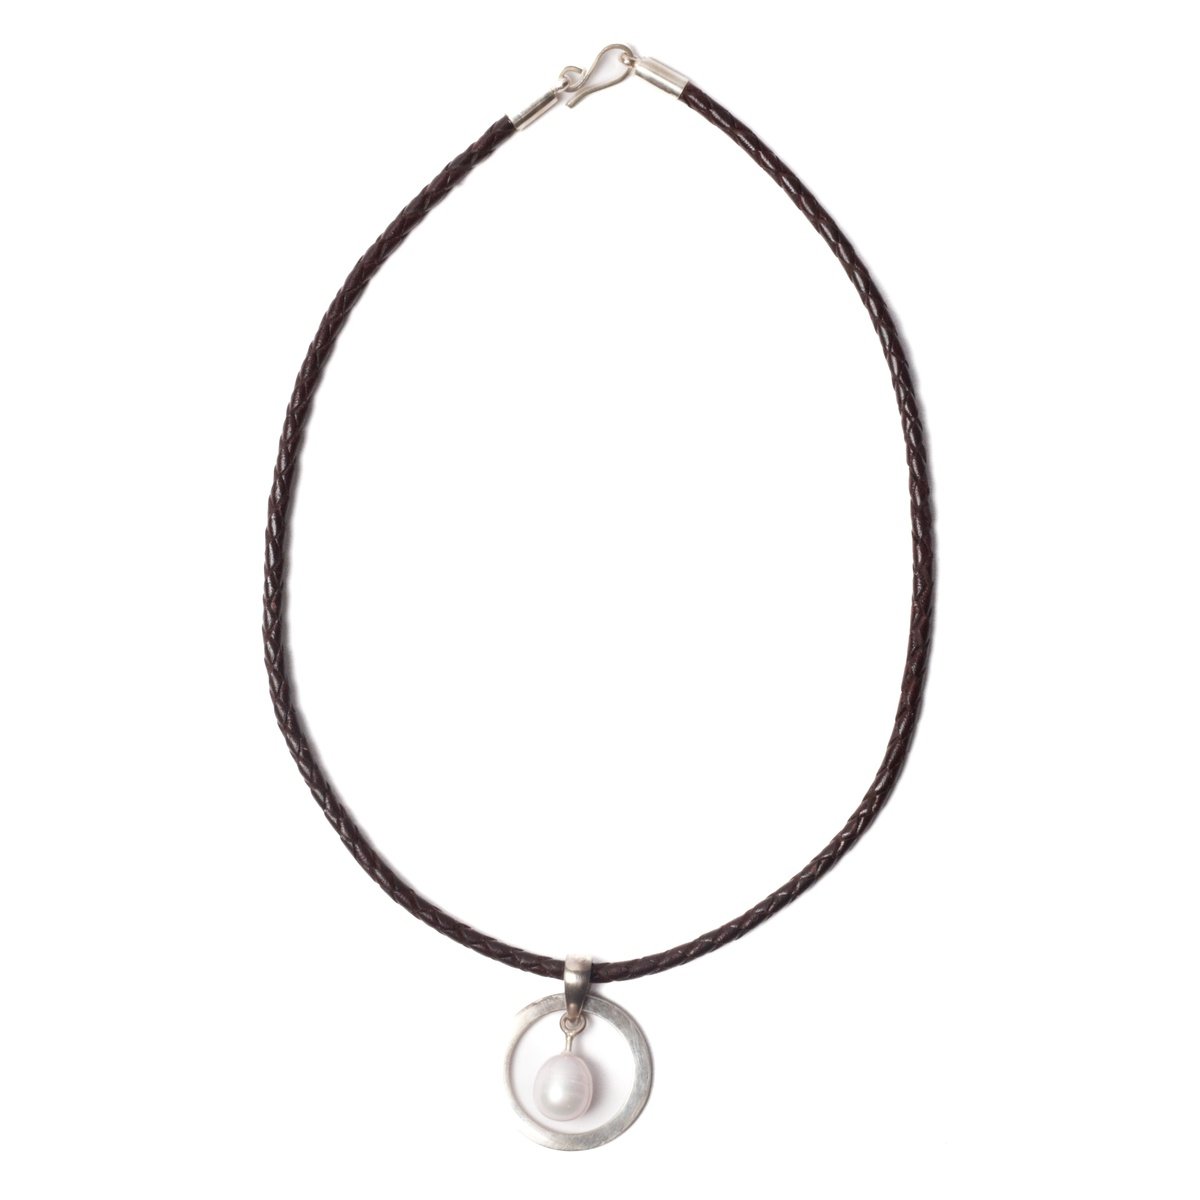 Plaited Necklace with Silver Ring & Pearl